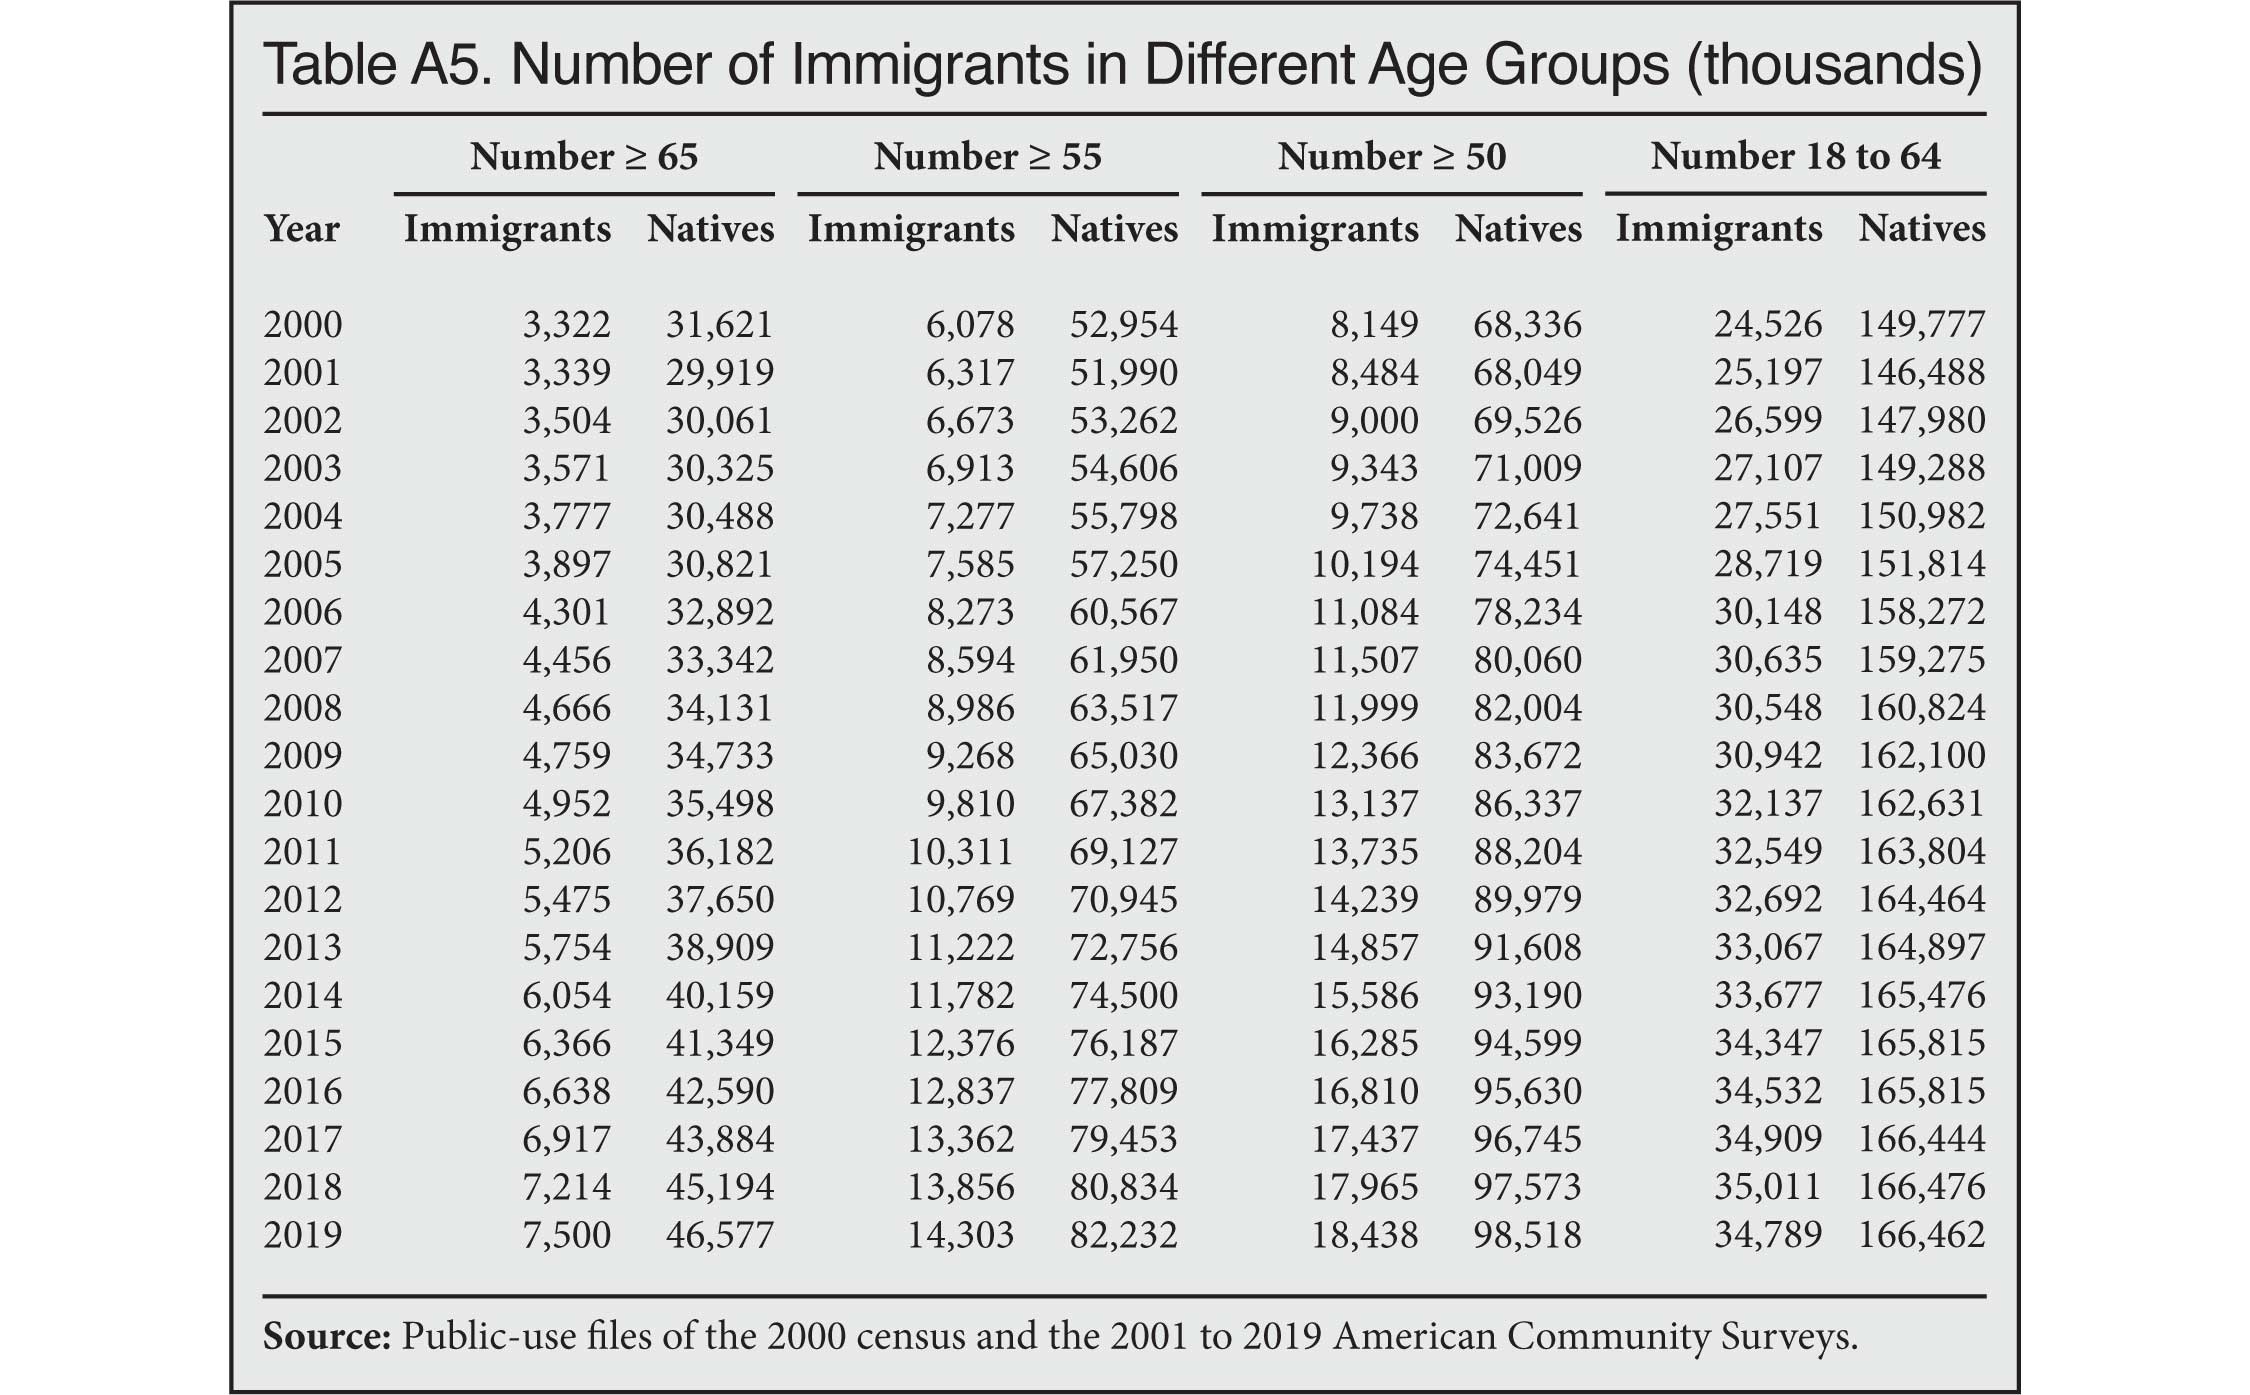 Table: Number of immigrants in different age groups